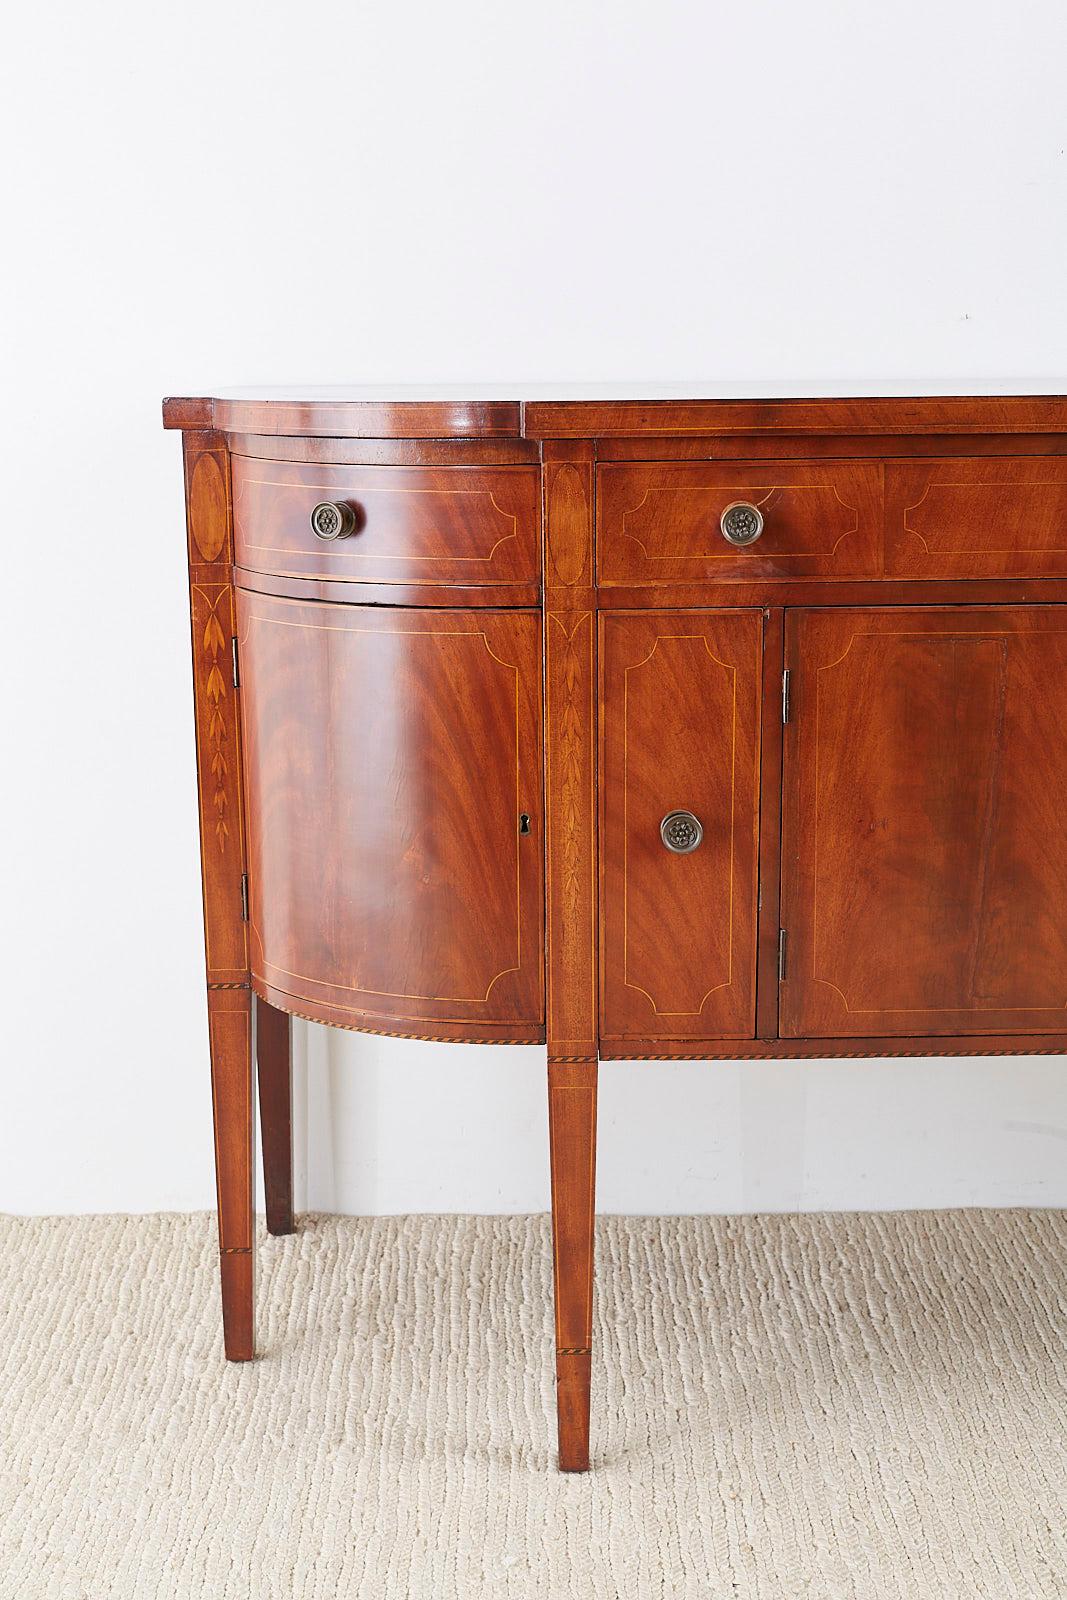 19th Century American Federal Mahogany Bow Front Sideboard